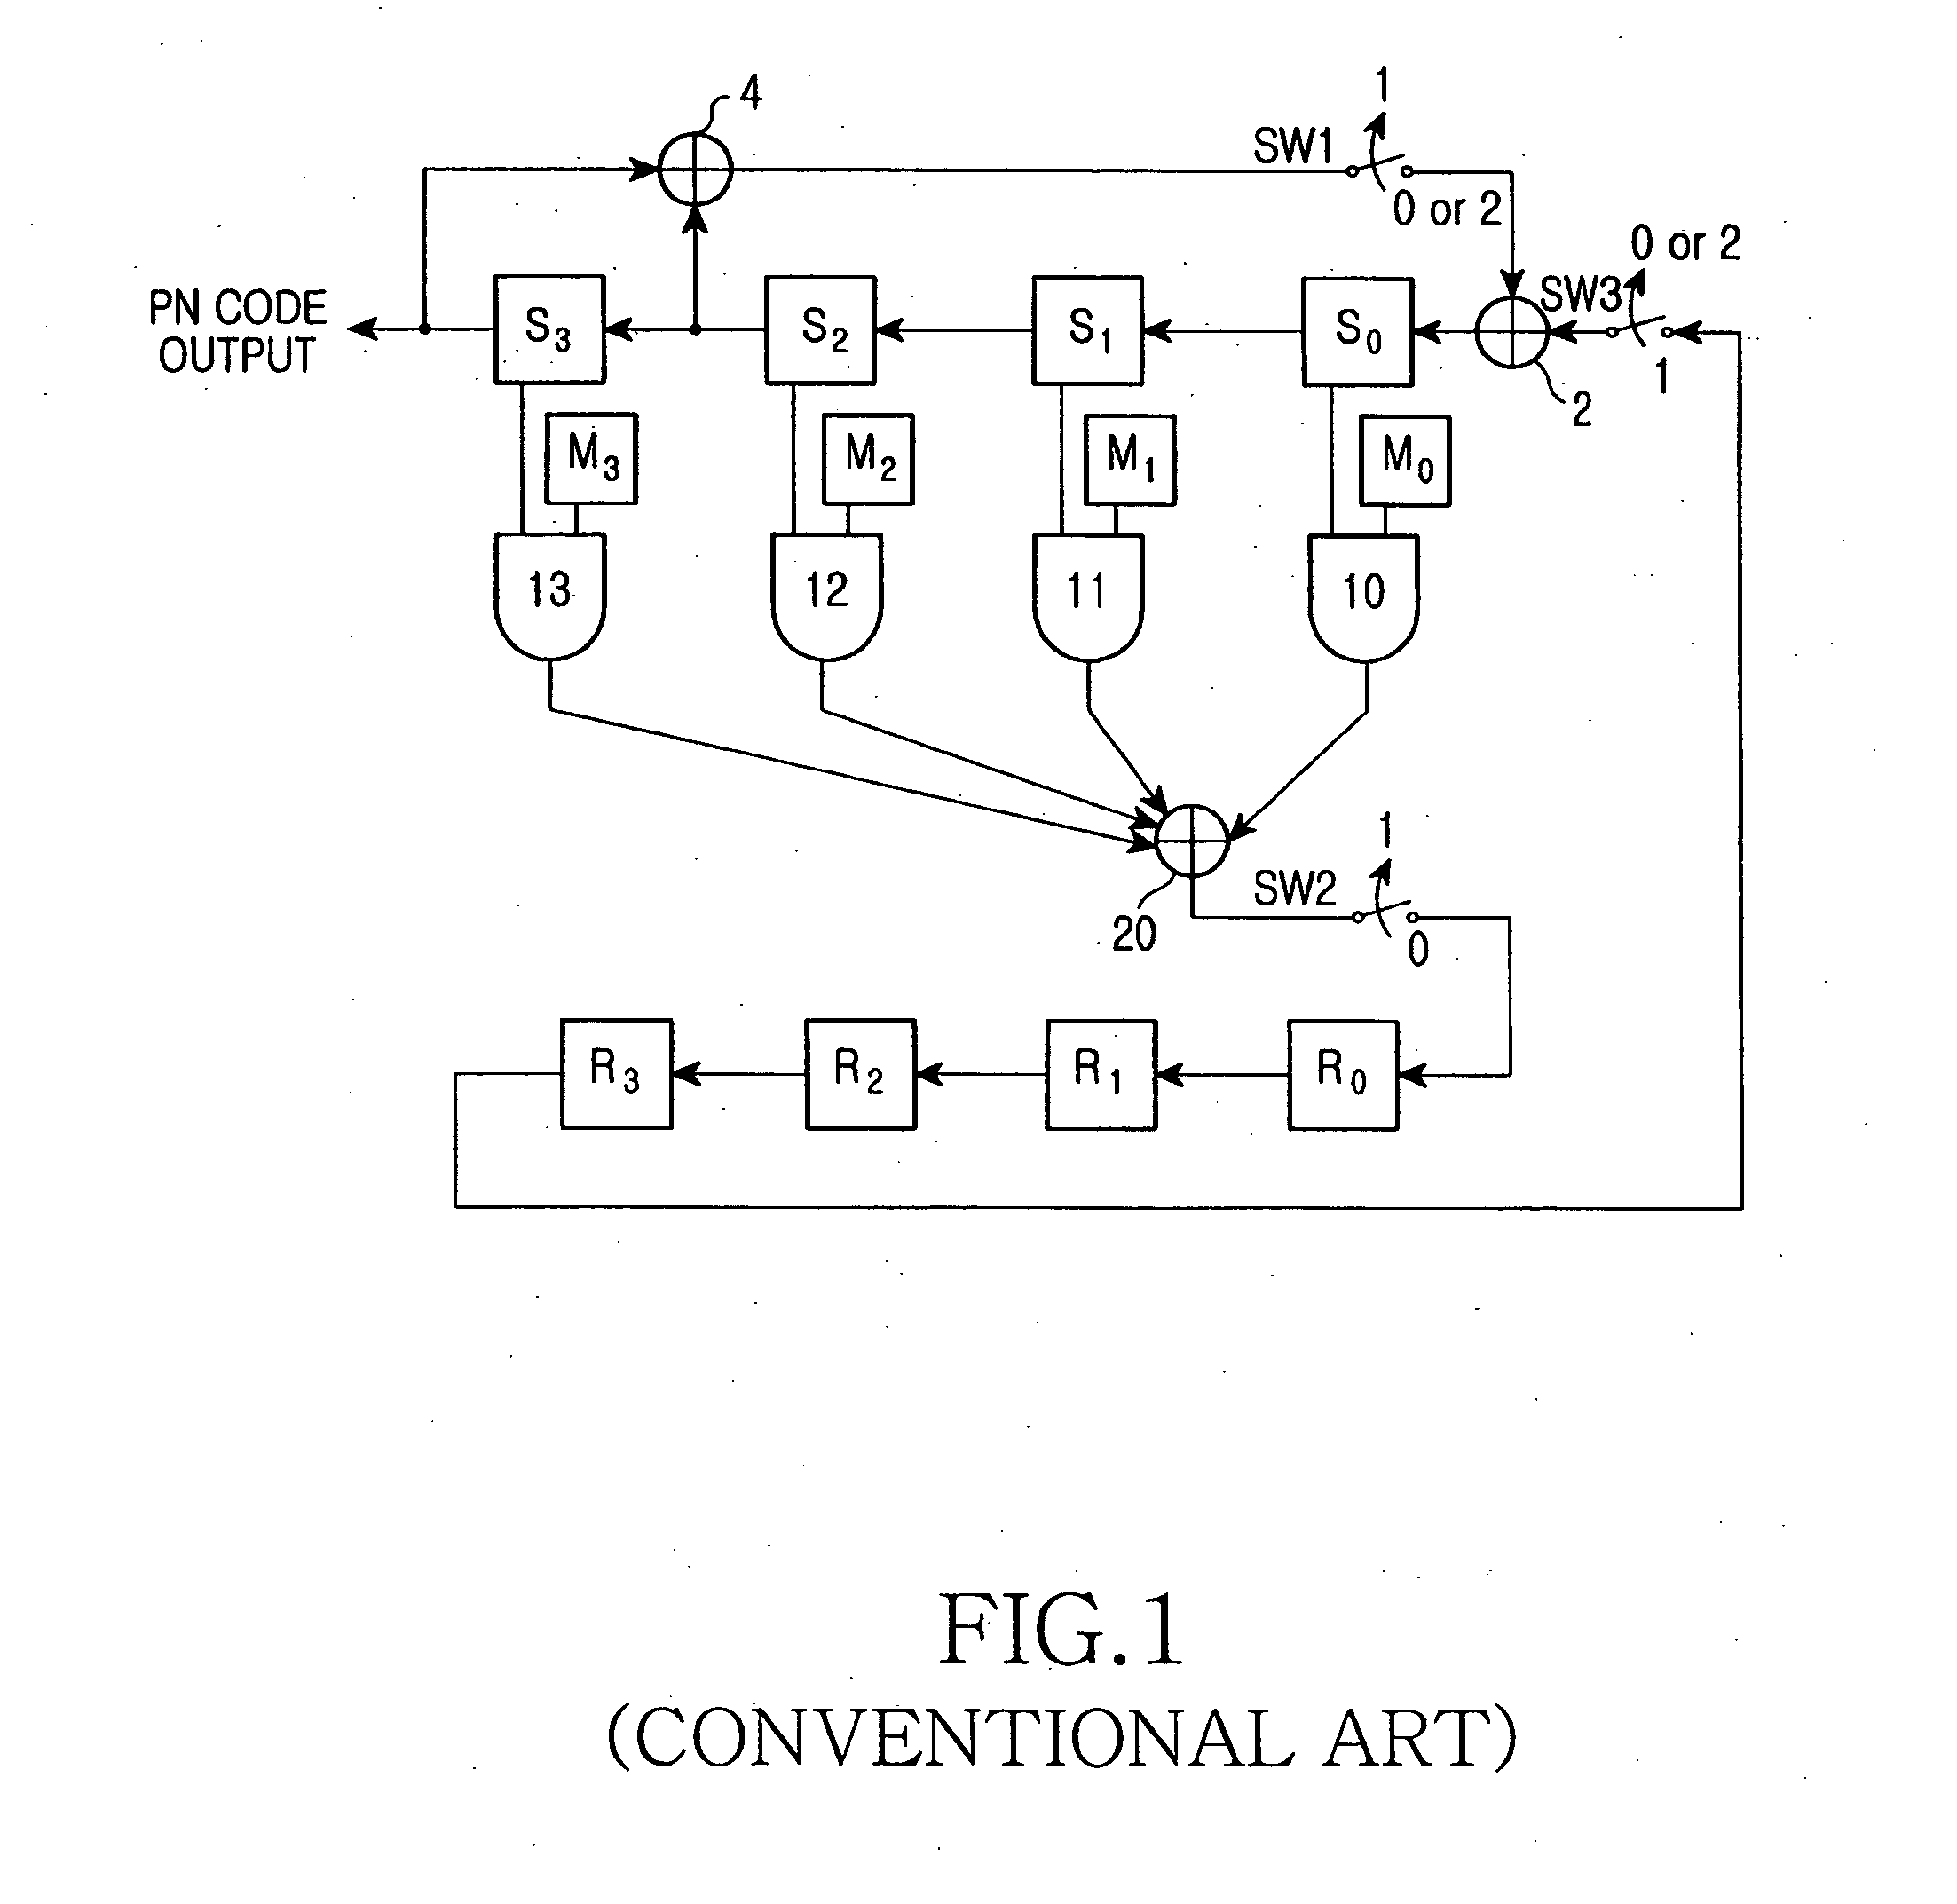 Method and apparatus for generating a pseudorandom binary sequence using a linear feedback shift register